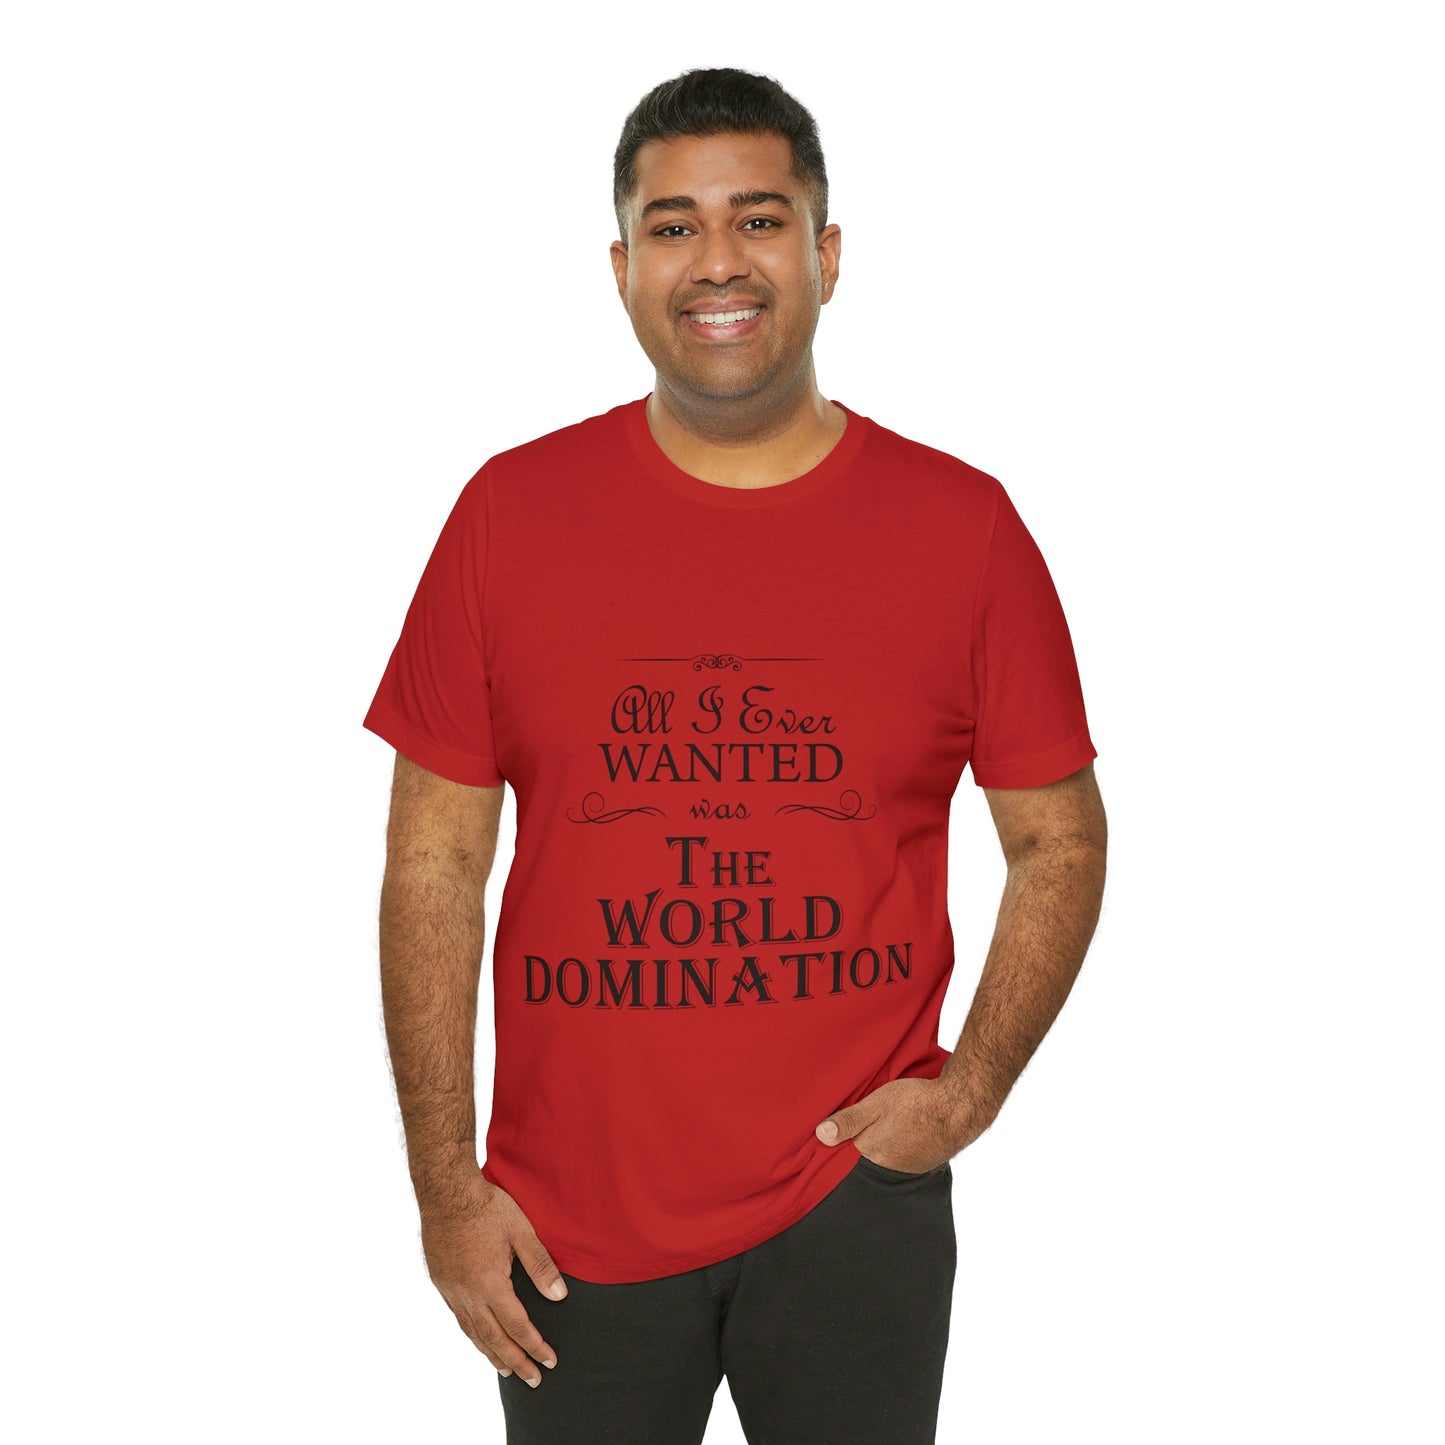 All I Ever Wanted Was The World Domination Funny Slogan Unisex Jersey Short Sleeve T-Shirt